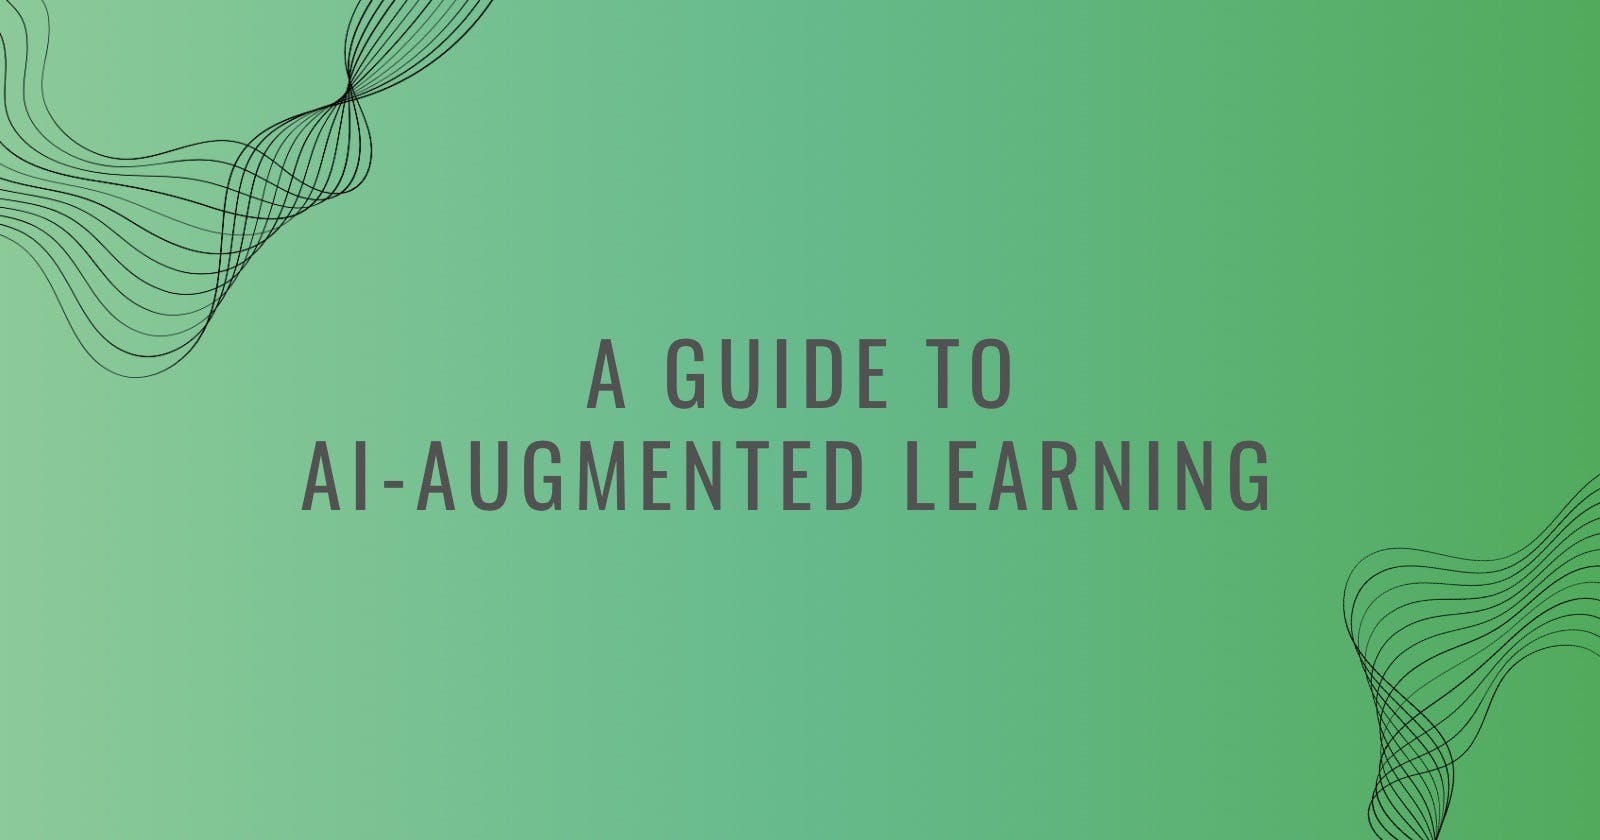 A Guide to AI-Augmented Learning